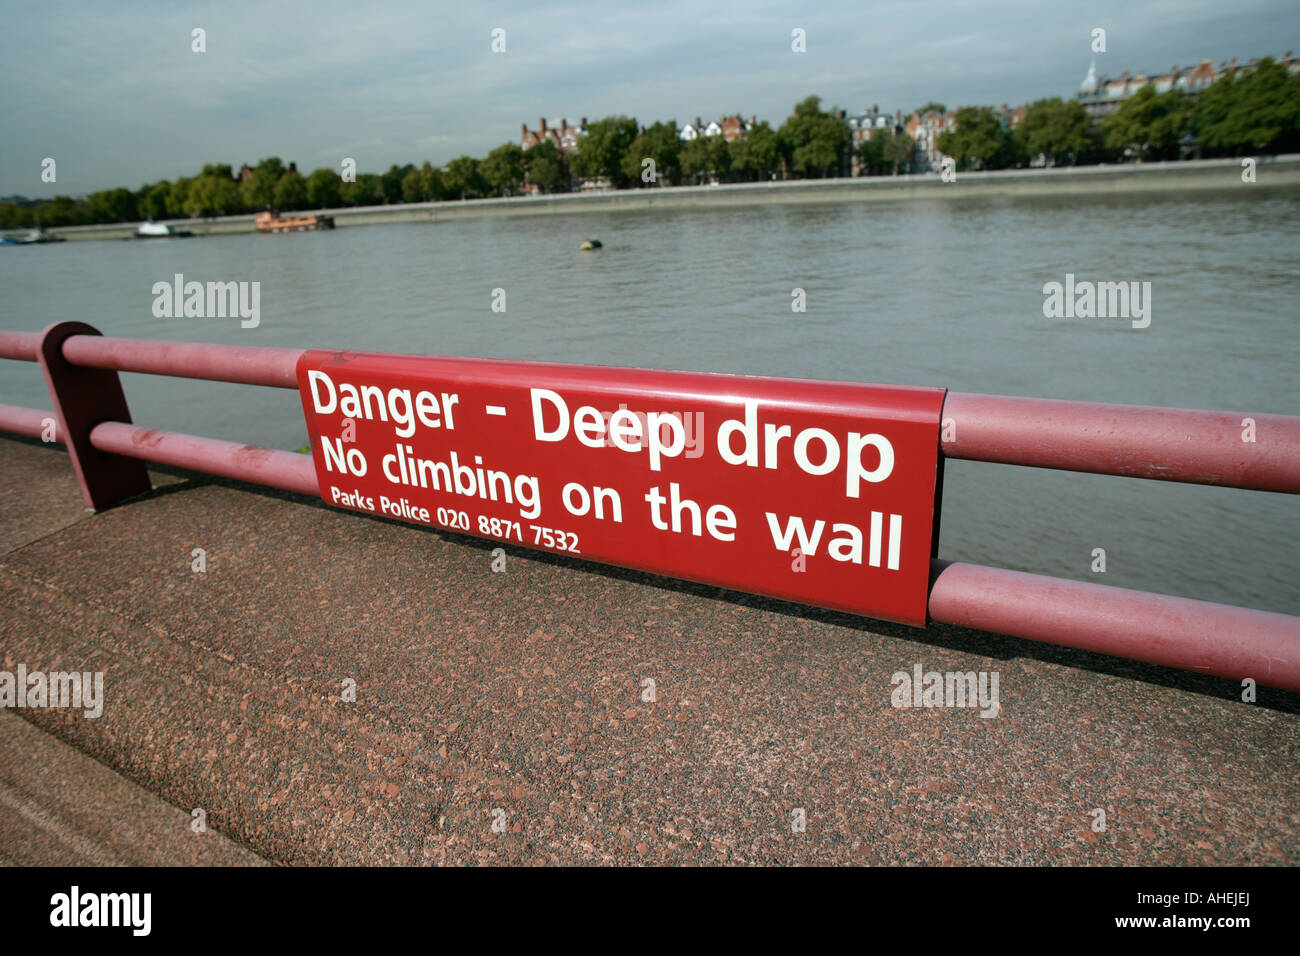 Warning sign by the River Thames banks, Battersea Park, London, England, UK Stock Photo